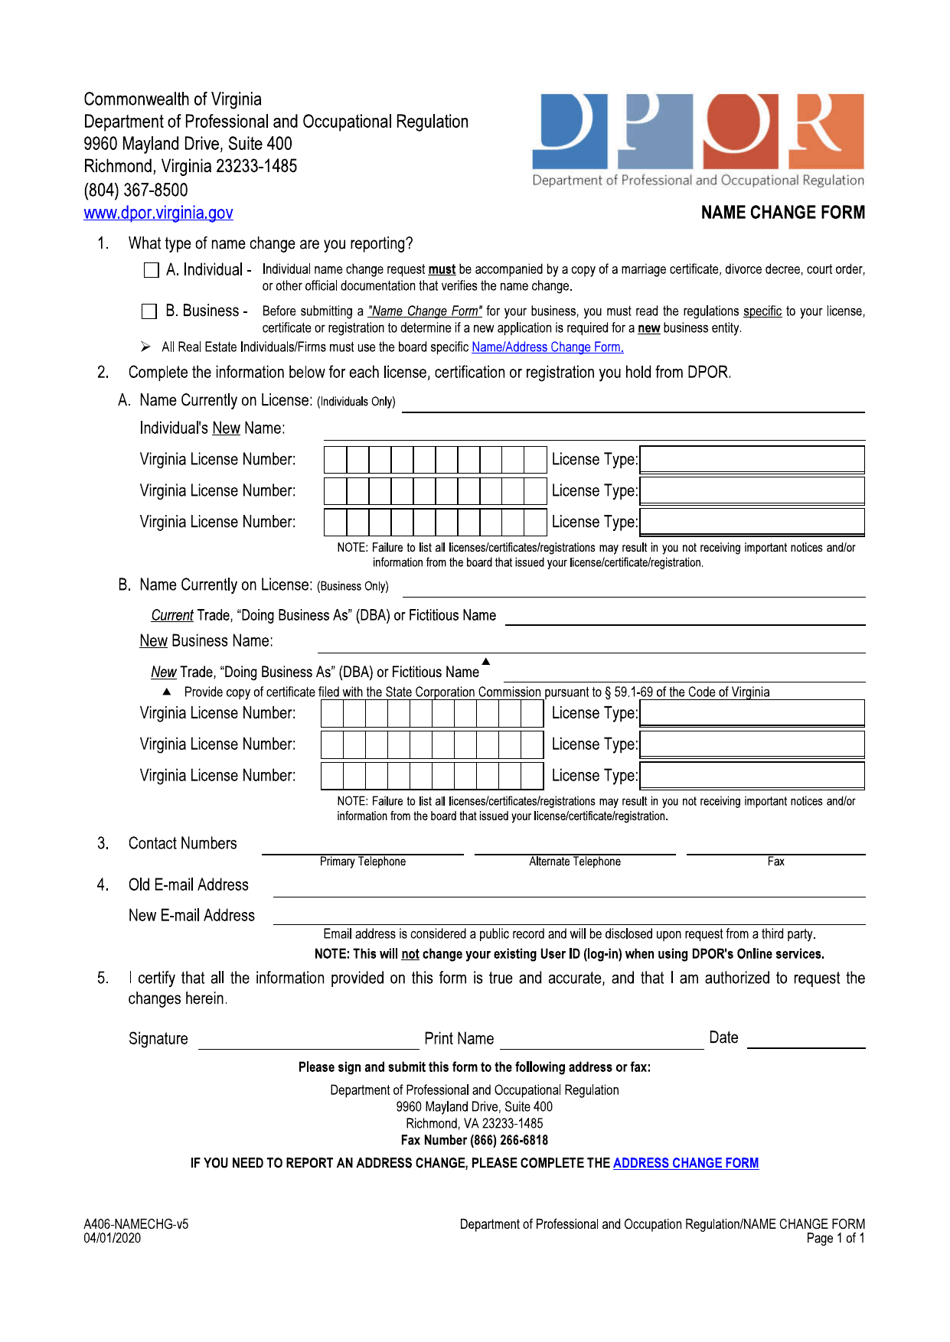 Form A406-NAMECHG Name Change Form - Virginia, Page 1